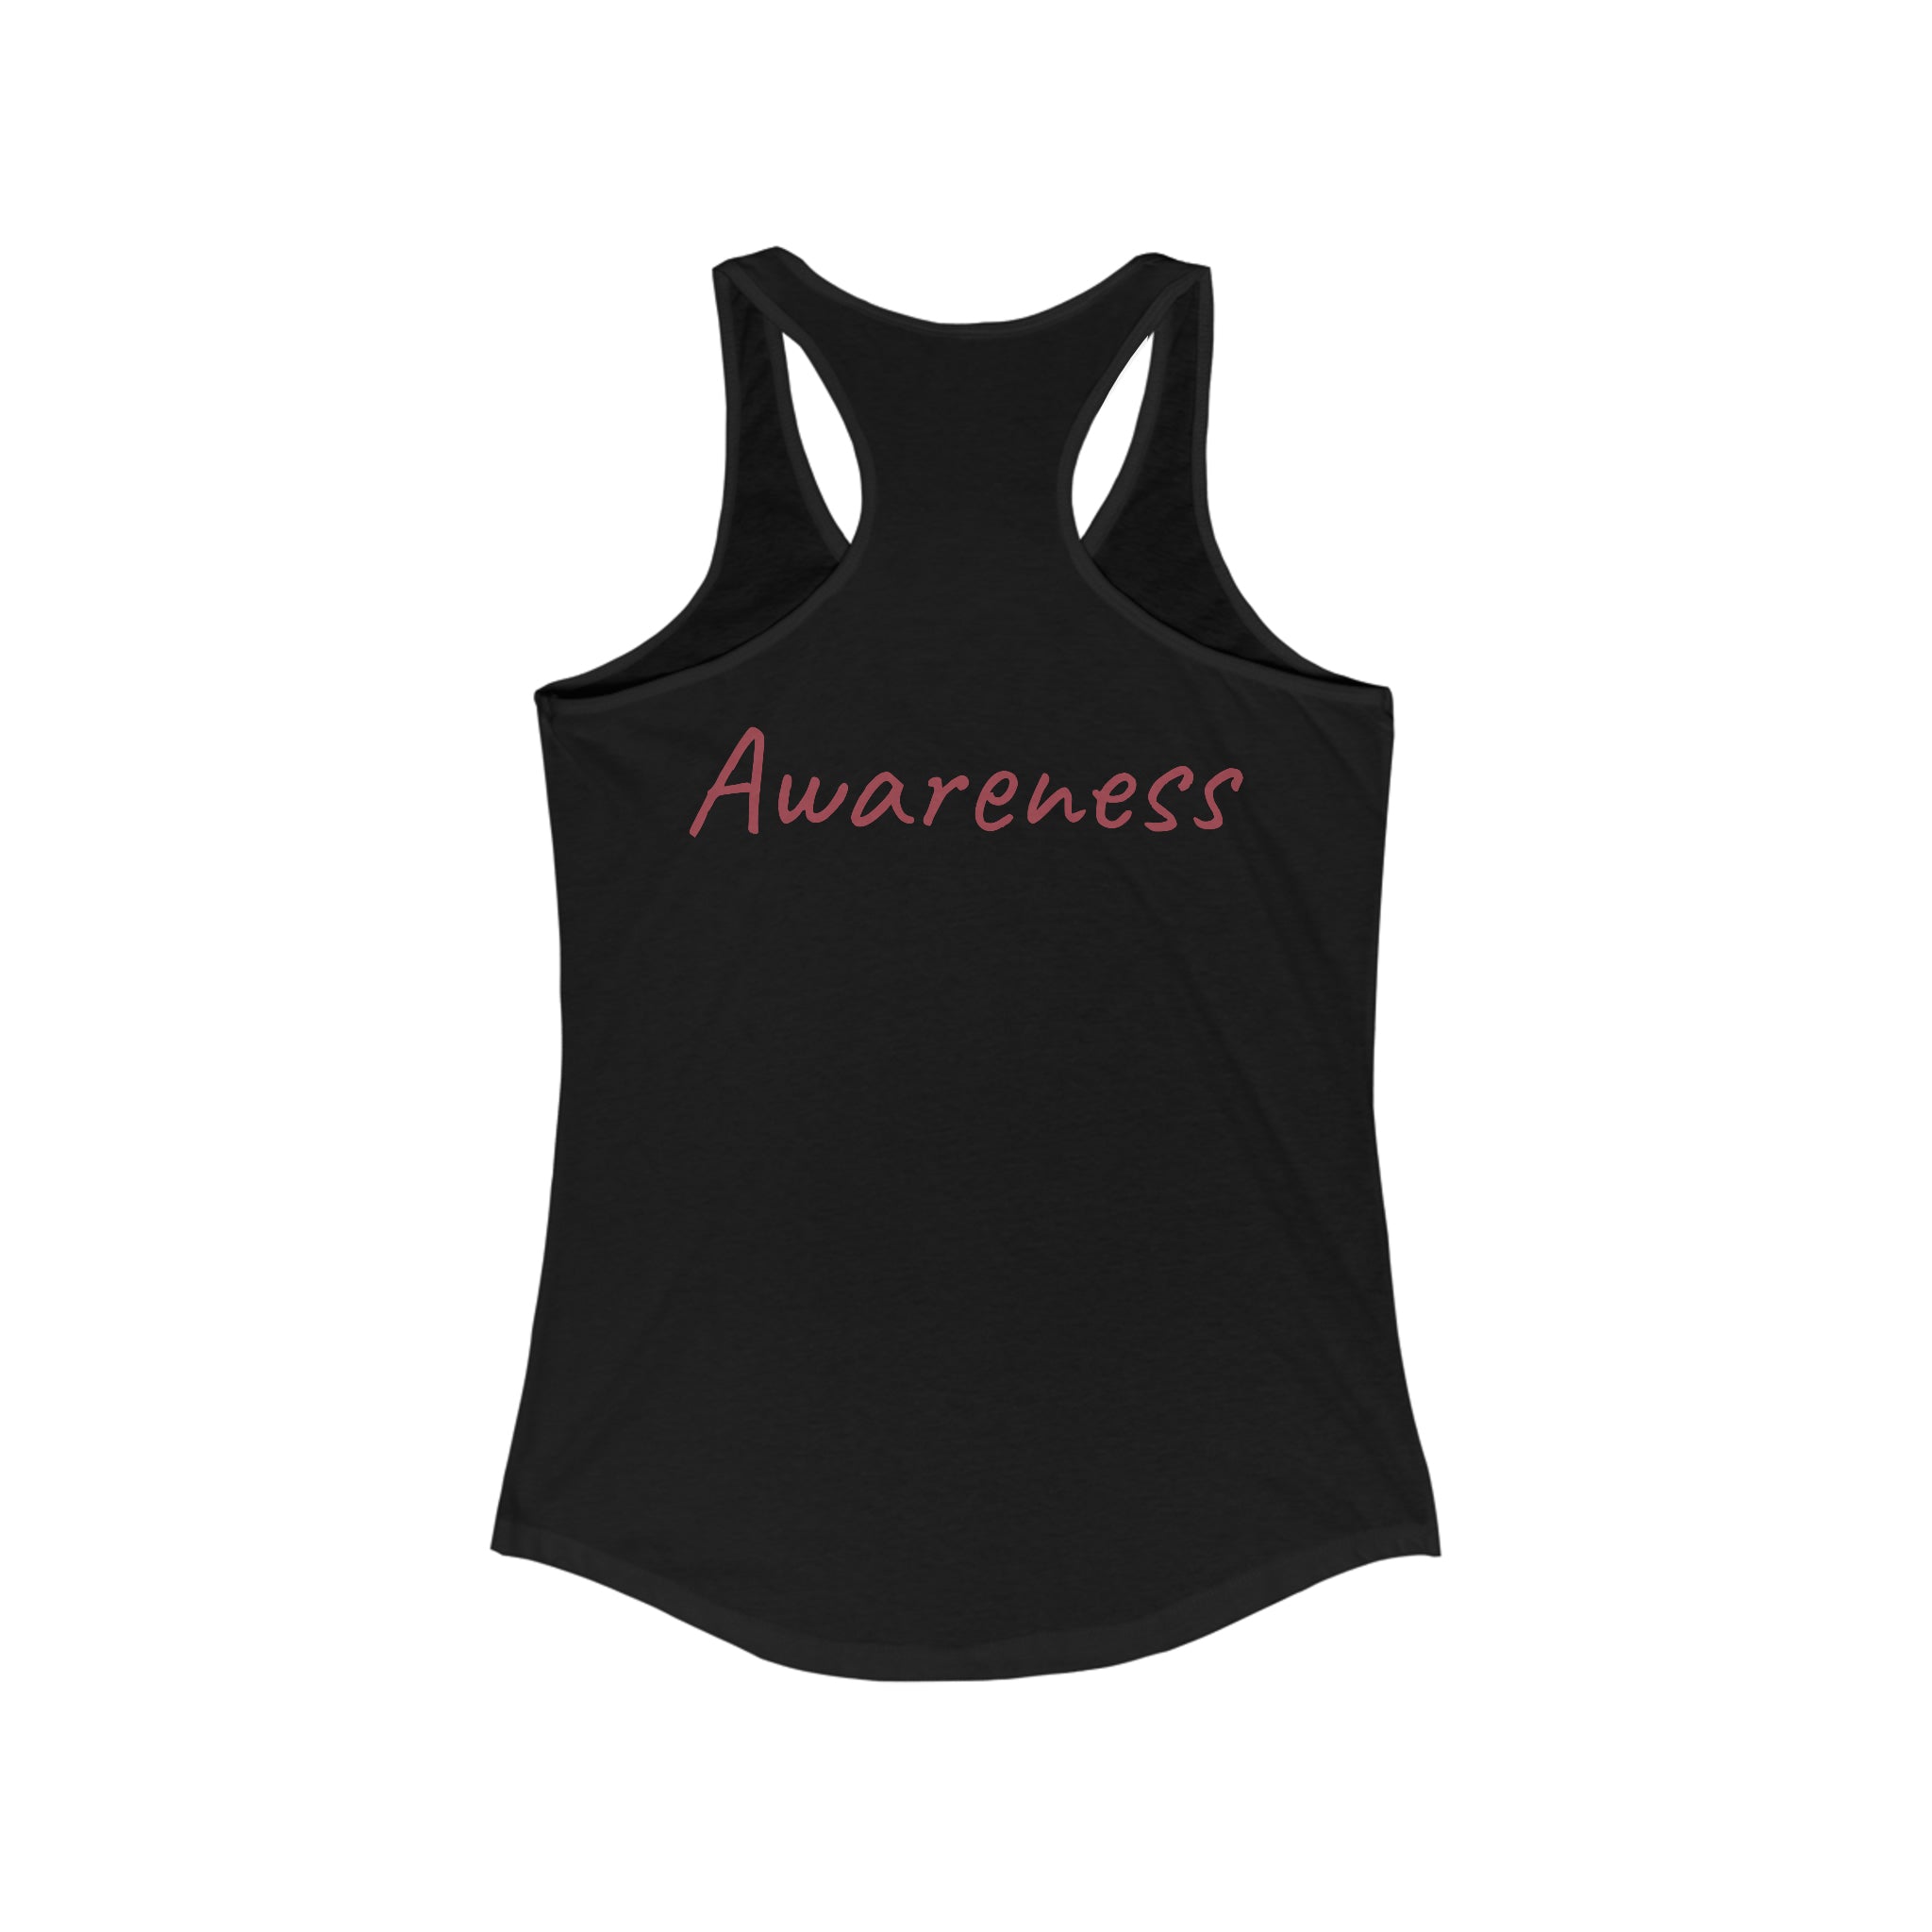 Awareness Racerback Tank: Mental Health Advocacy Solid Black Activewear Athletic Tank Gym Clothes Performance Tank Racerback Sleeveless Top Sporty Apparel Tank Top Women's Tank Workout Gear Yoga Tank Tank Top 14032448730604720509_2048_76d1bf1f-10dc-4bd6-8e97-b55c6796c5fc Printify